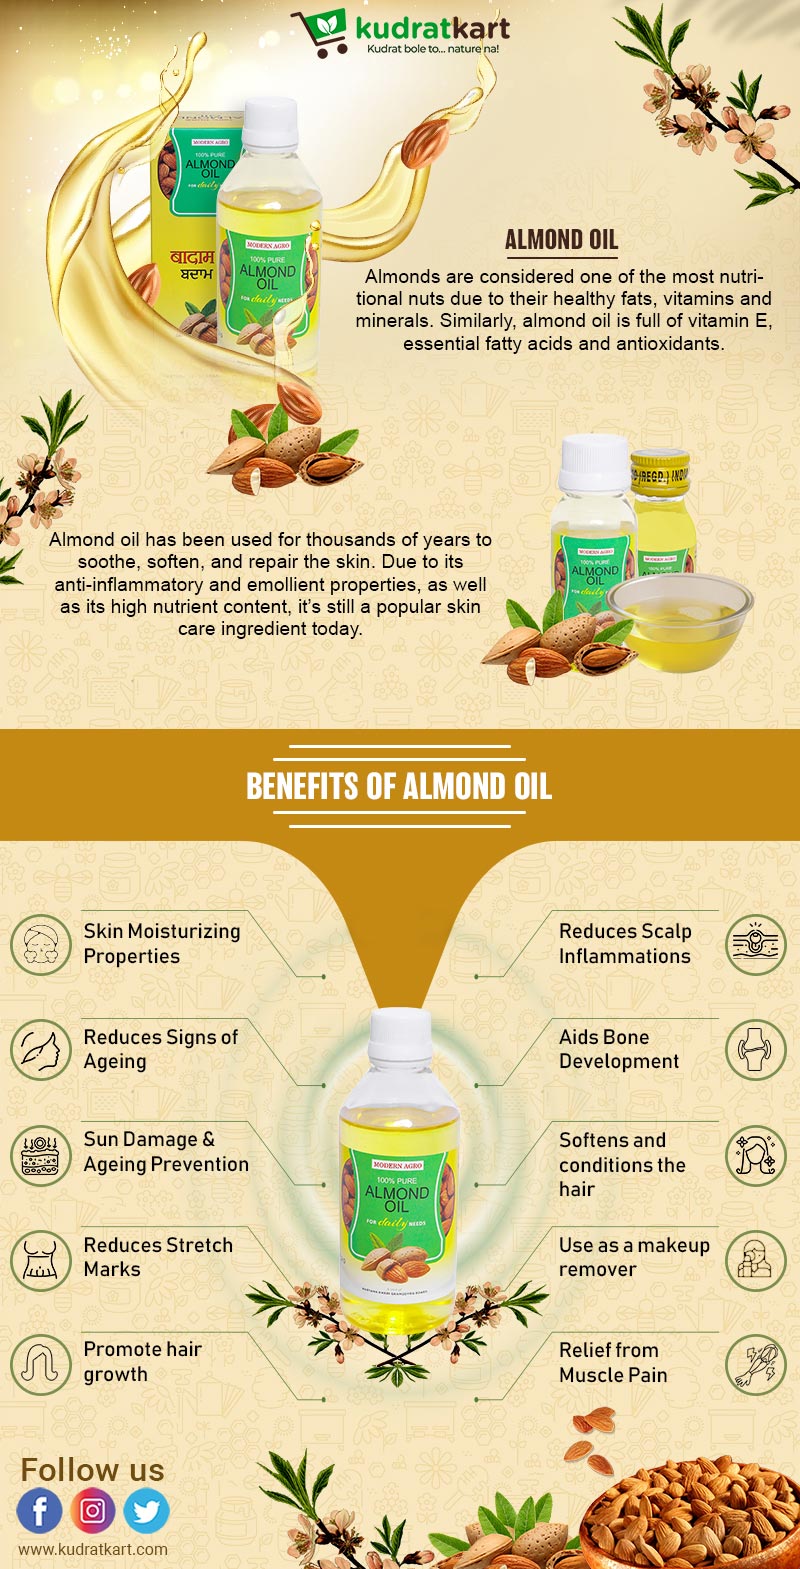 Pure Cold Pressed Sweet Almond Oil For Hair And Skin